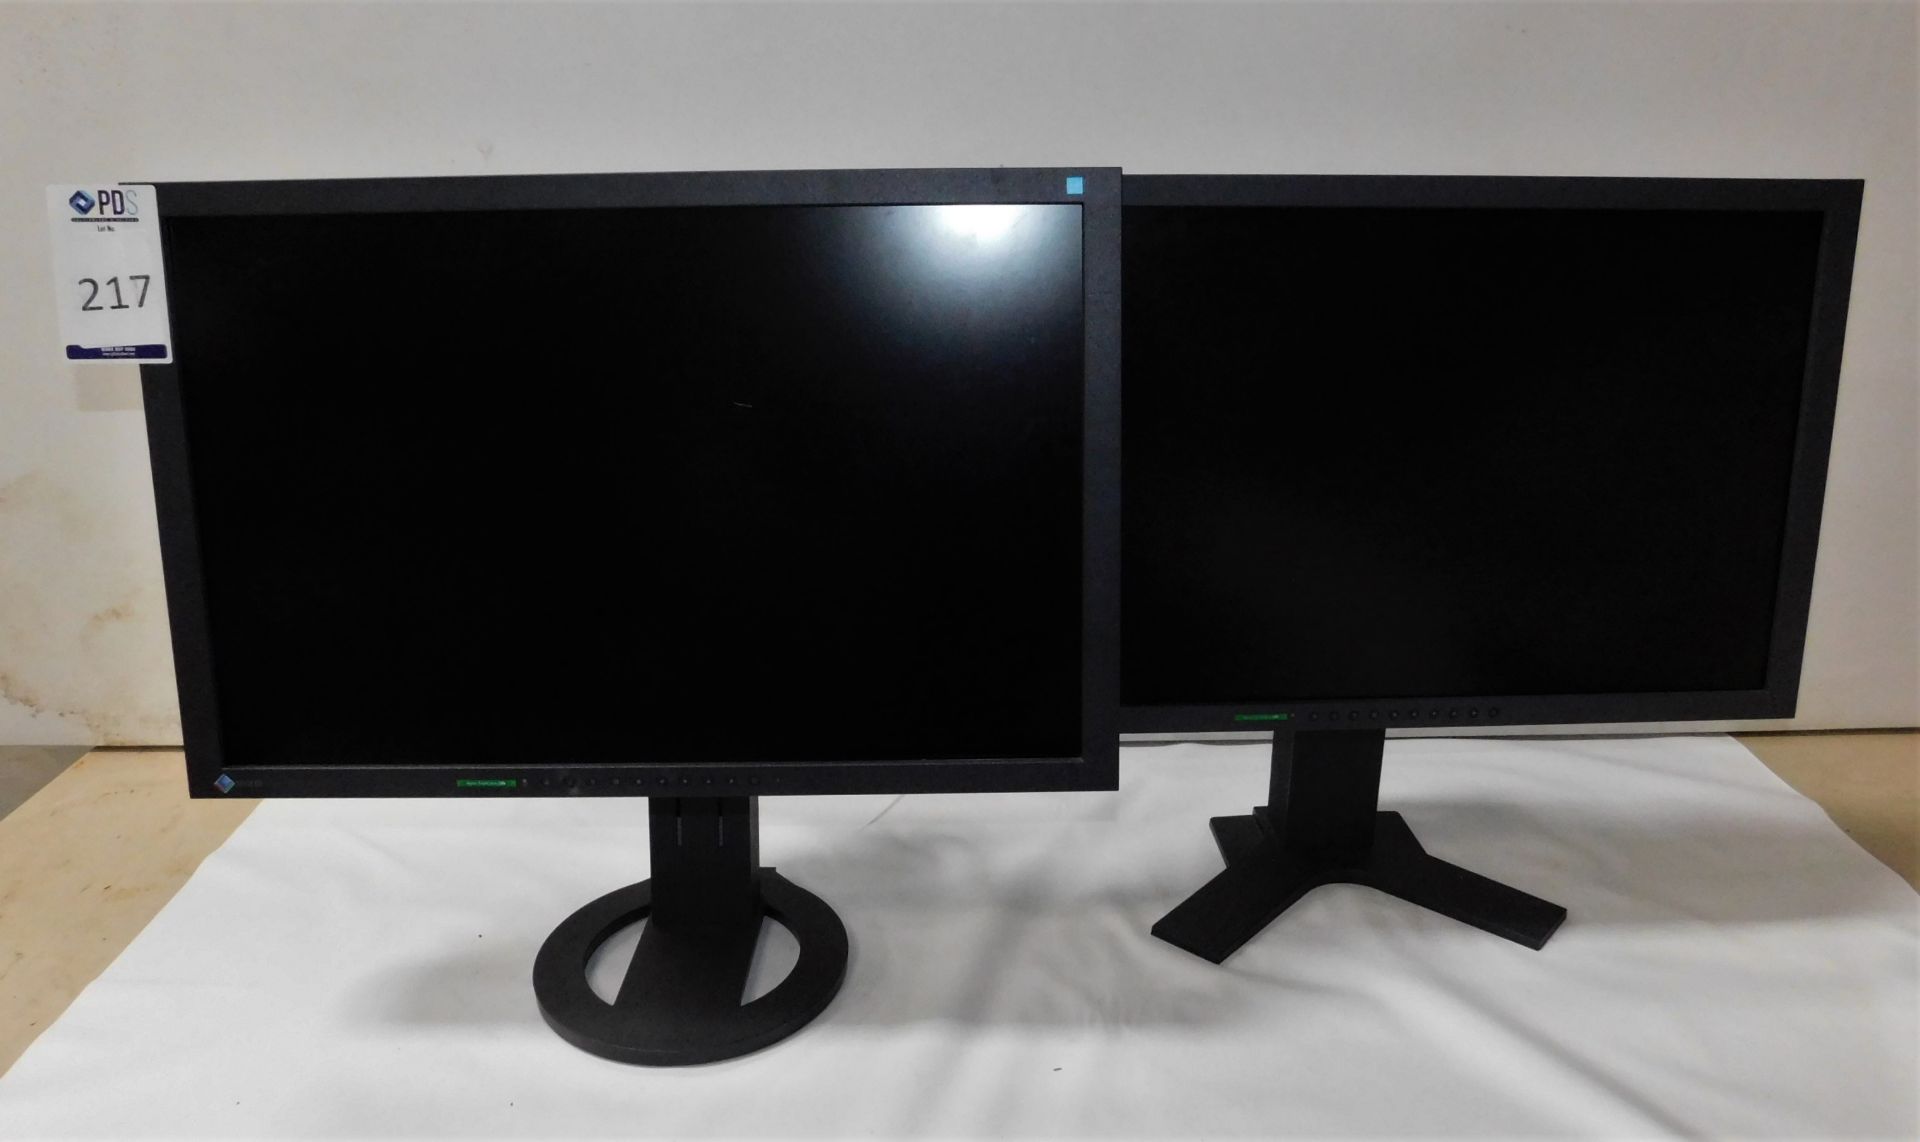 EIZO FlexScan S2433W 24” Monitor, Slight Mark on Screen & Another (Location Brentwood. Please